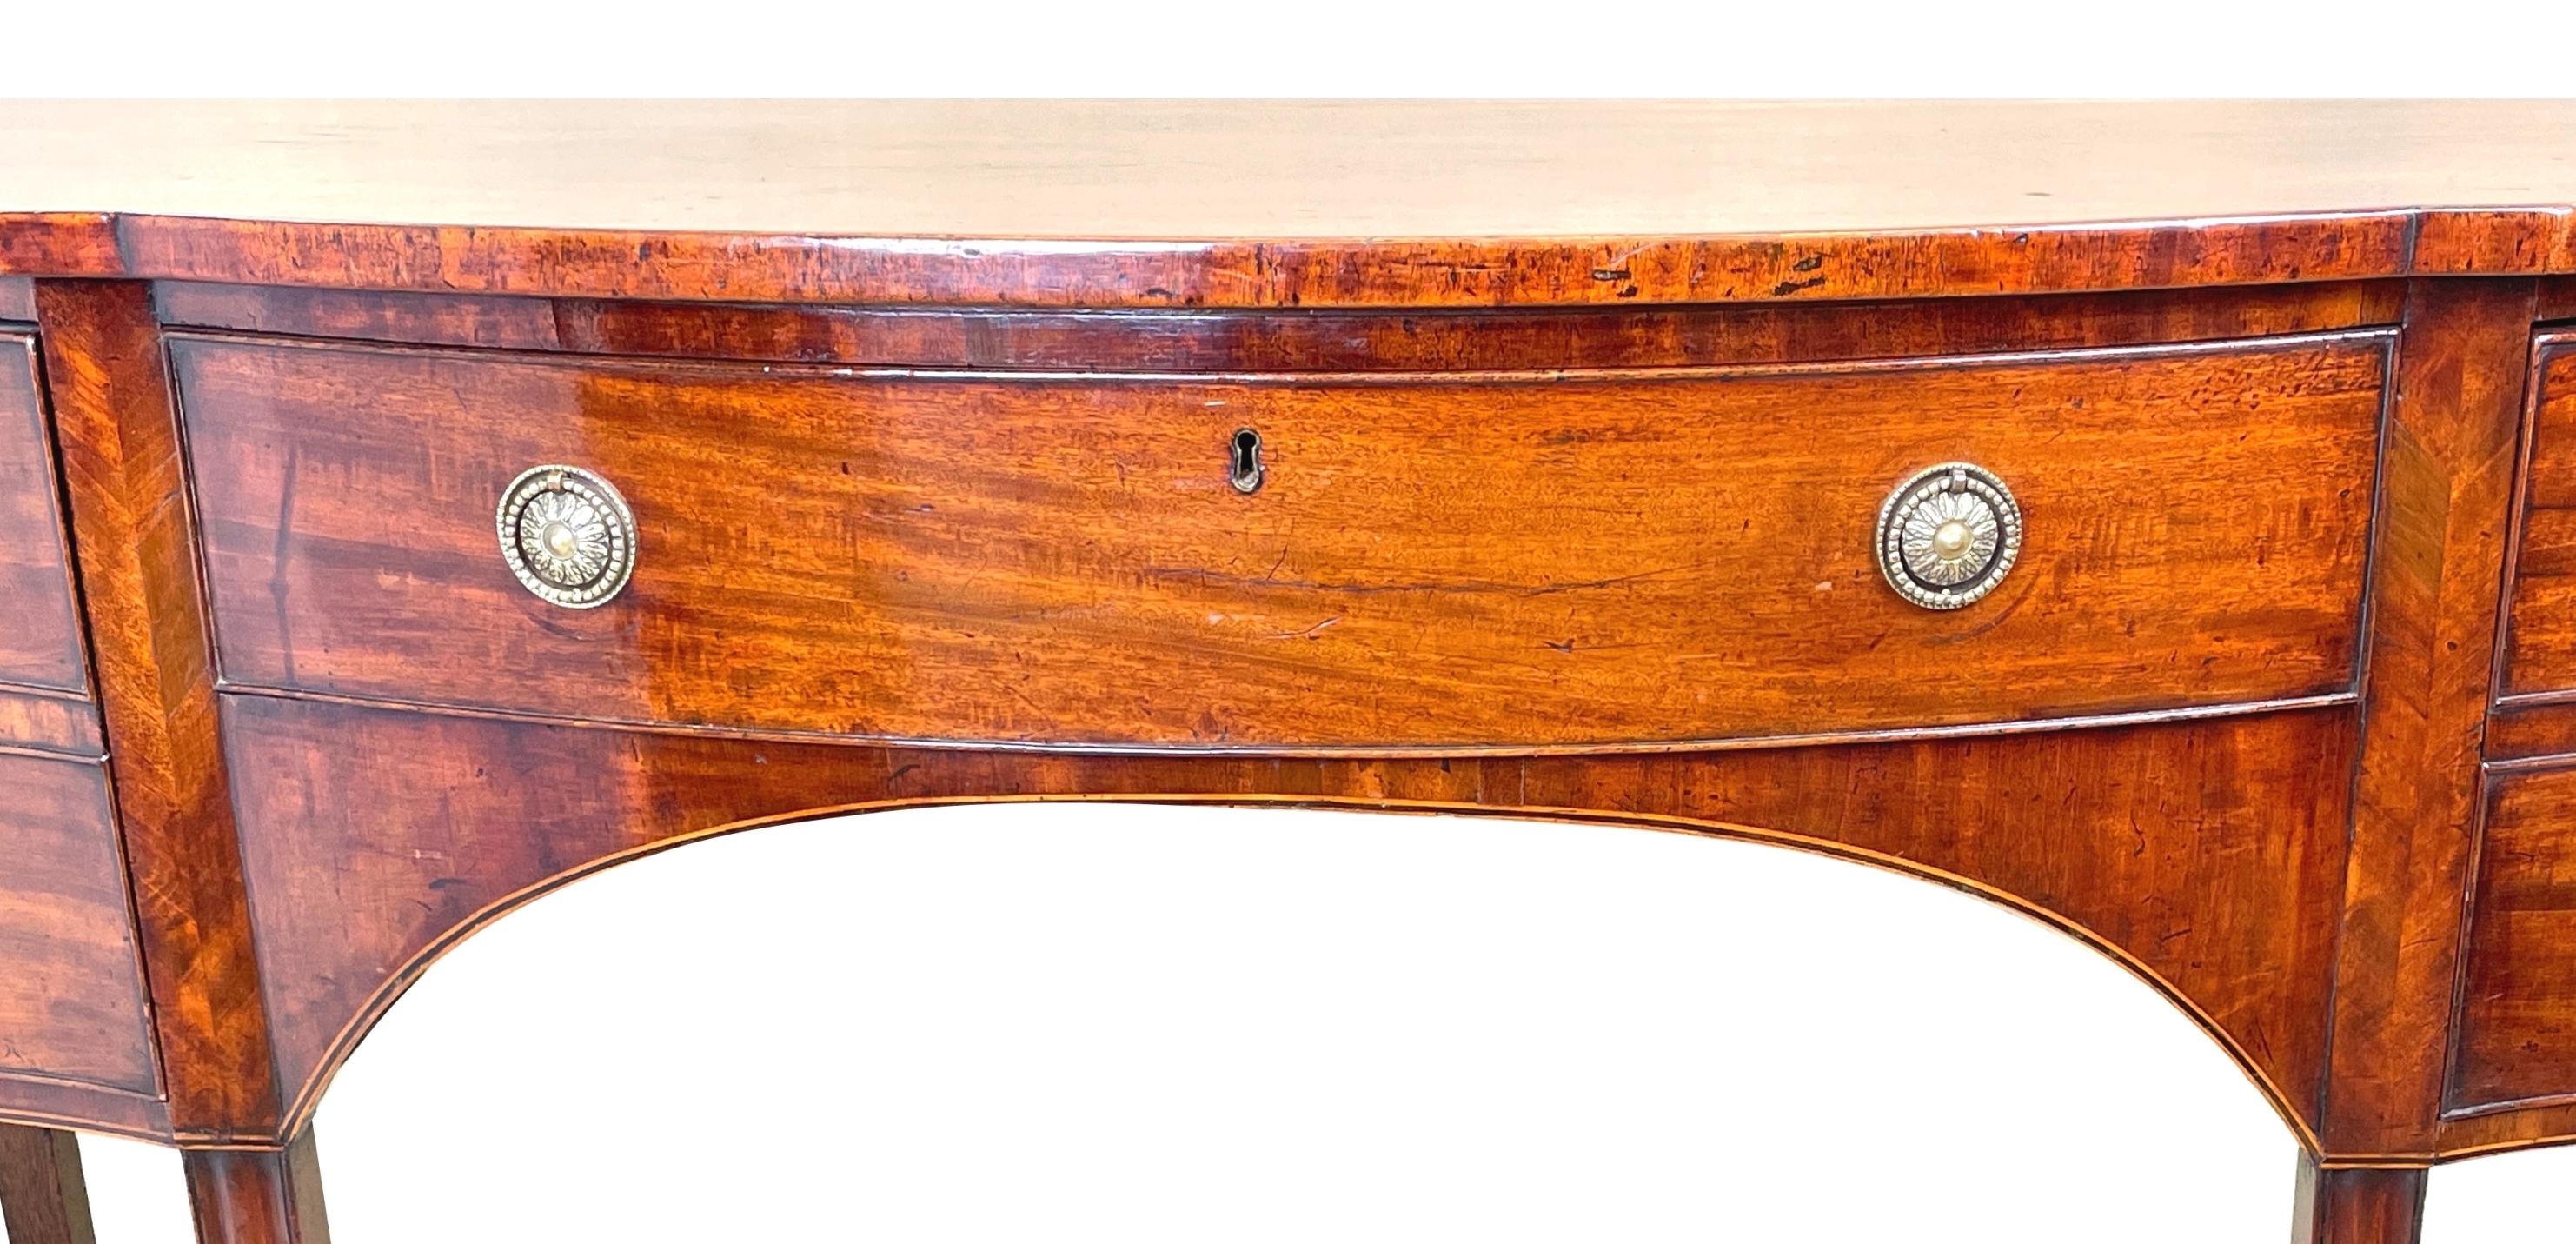 A Very Good Quality George III Hepplewhite Period Mahogany Serpentine Shaped Sideboard Having Well Figured Top Over Three Drawers With Replacement Brass Handles, Unusually With Elegant Herringbone Detailed Decoration To Stiles Raised On Square